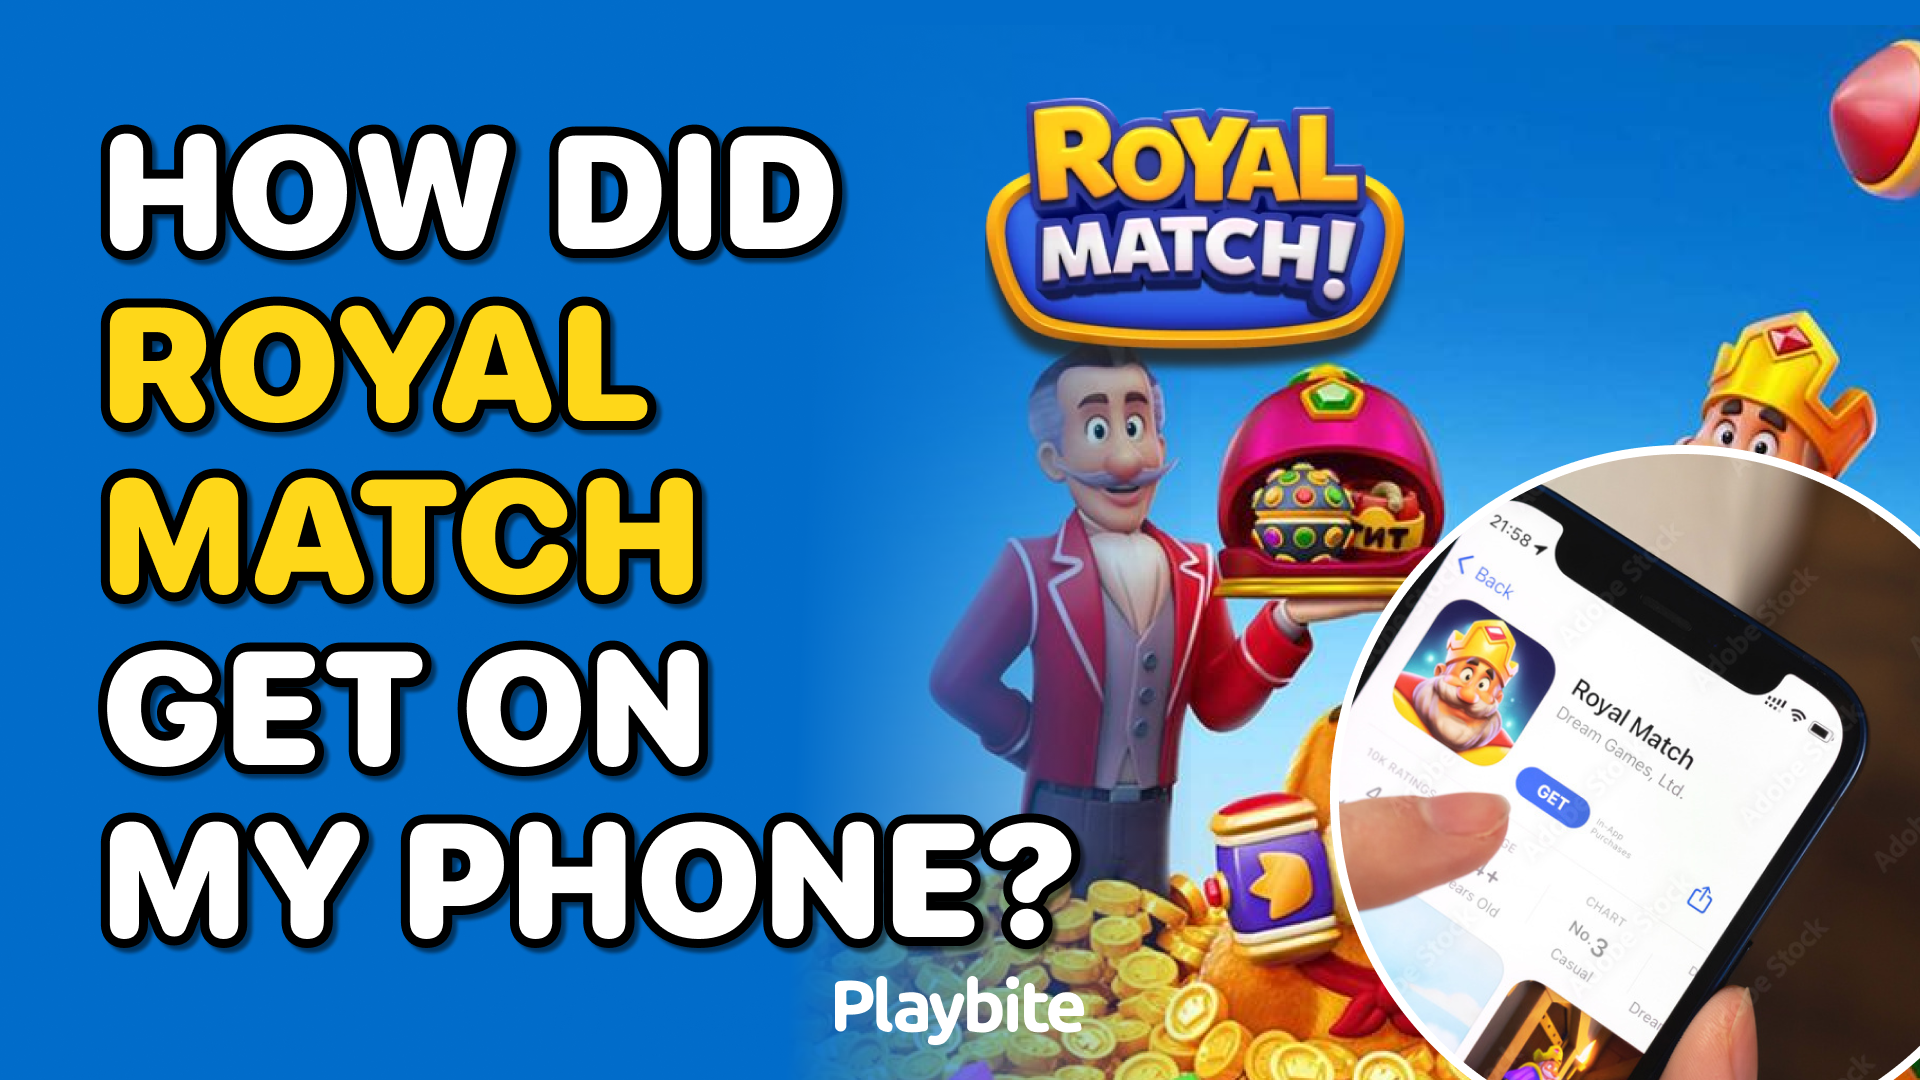 How Did Royal Match Get On My Phone?